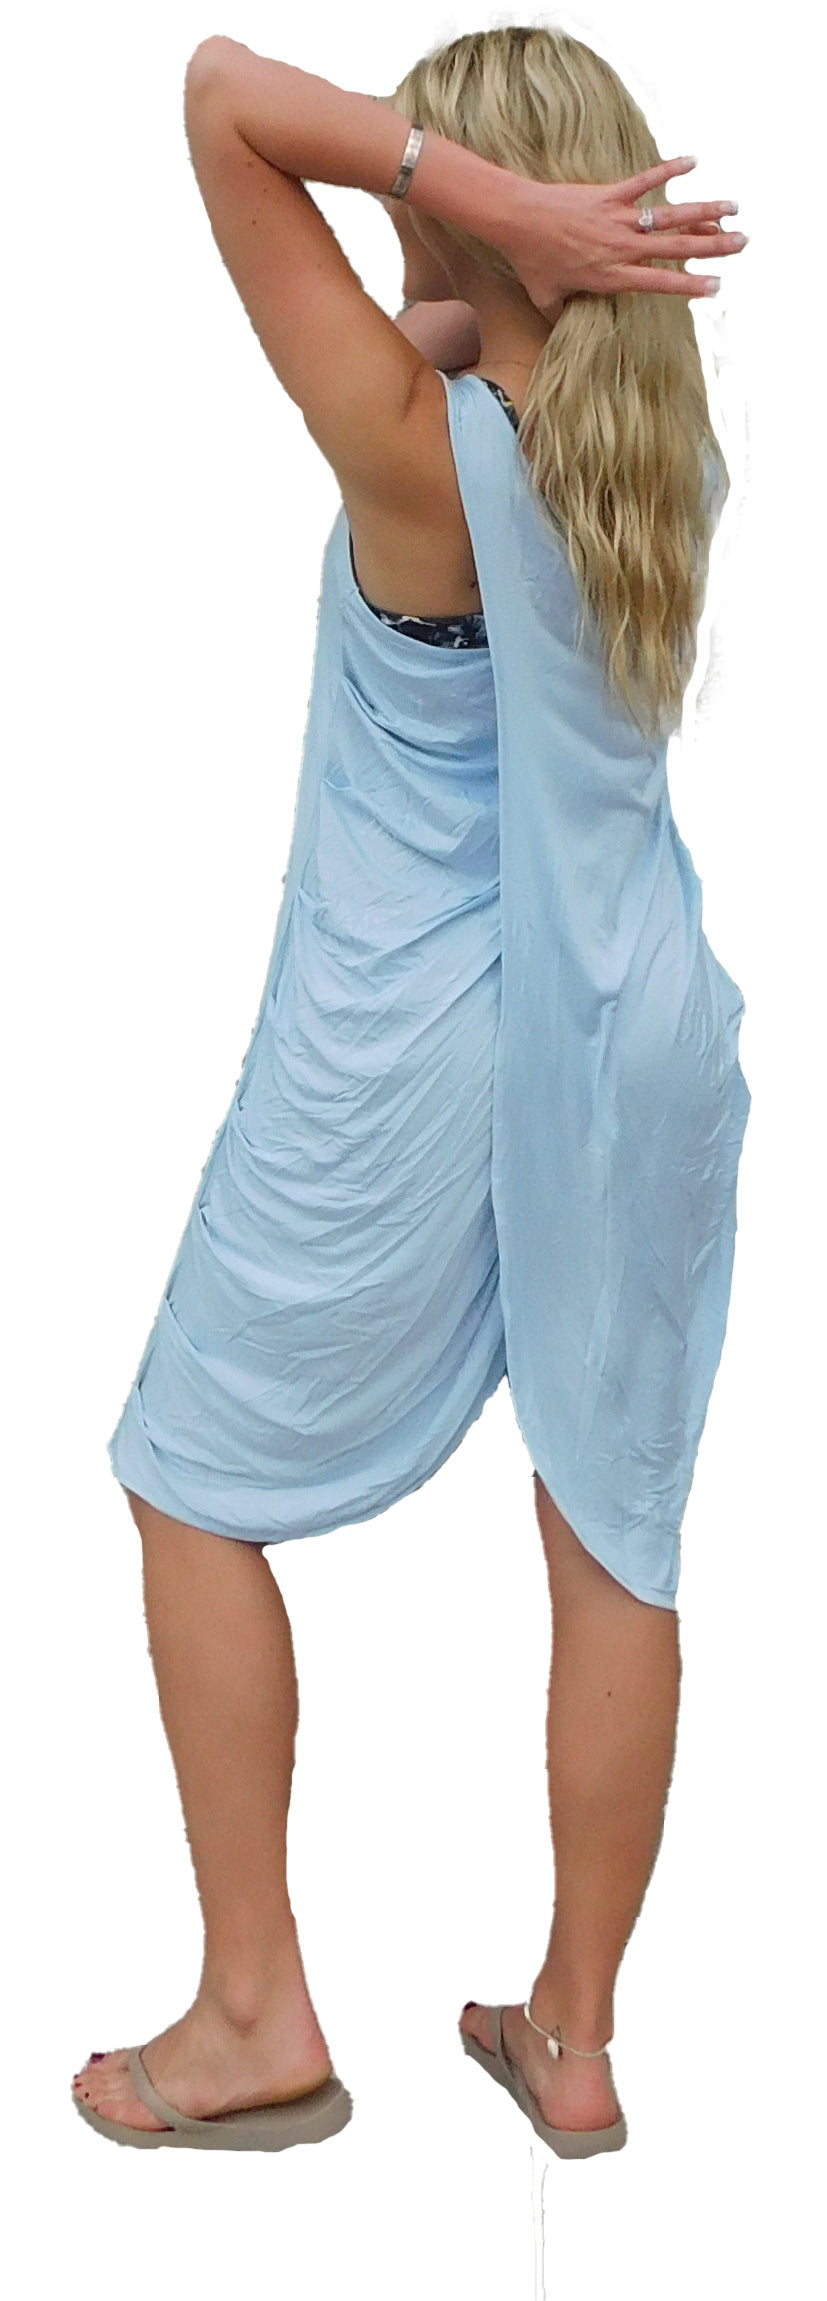 Yogaz New Eco Friendly Bamboo Light Blue Swimsuit Cover-Sun Dress is called "Wave". It's super cute, elegant and so comfortable.